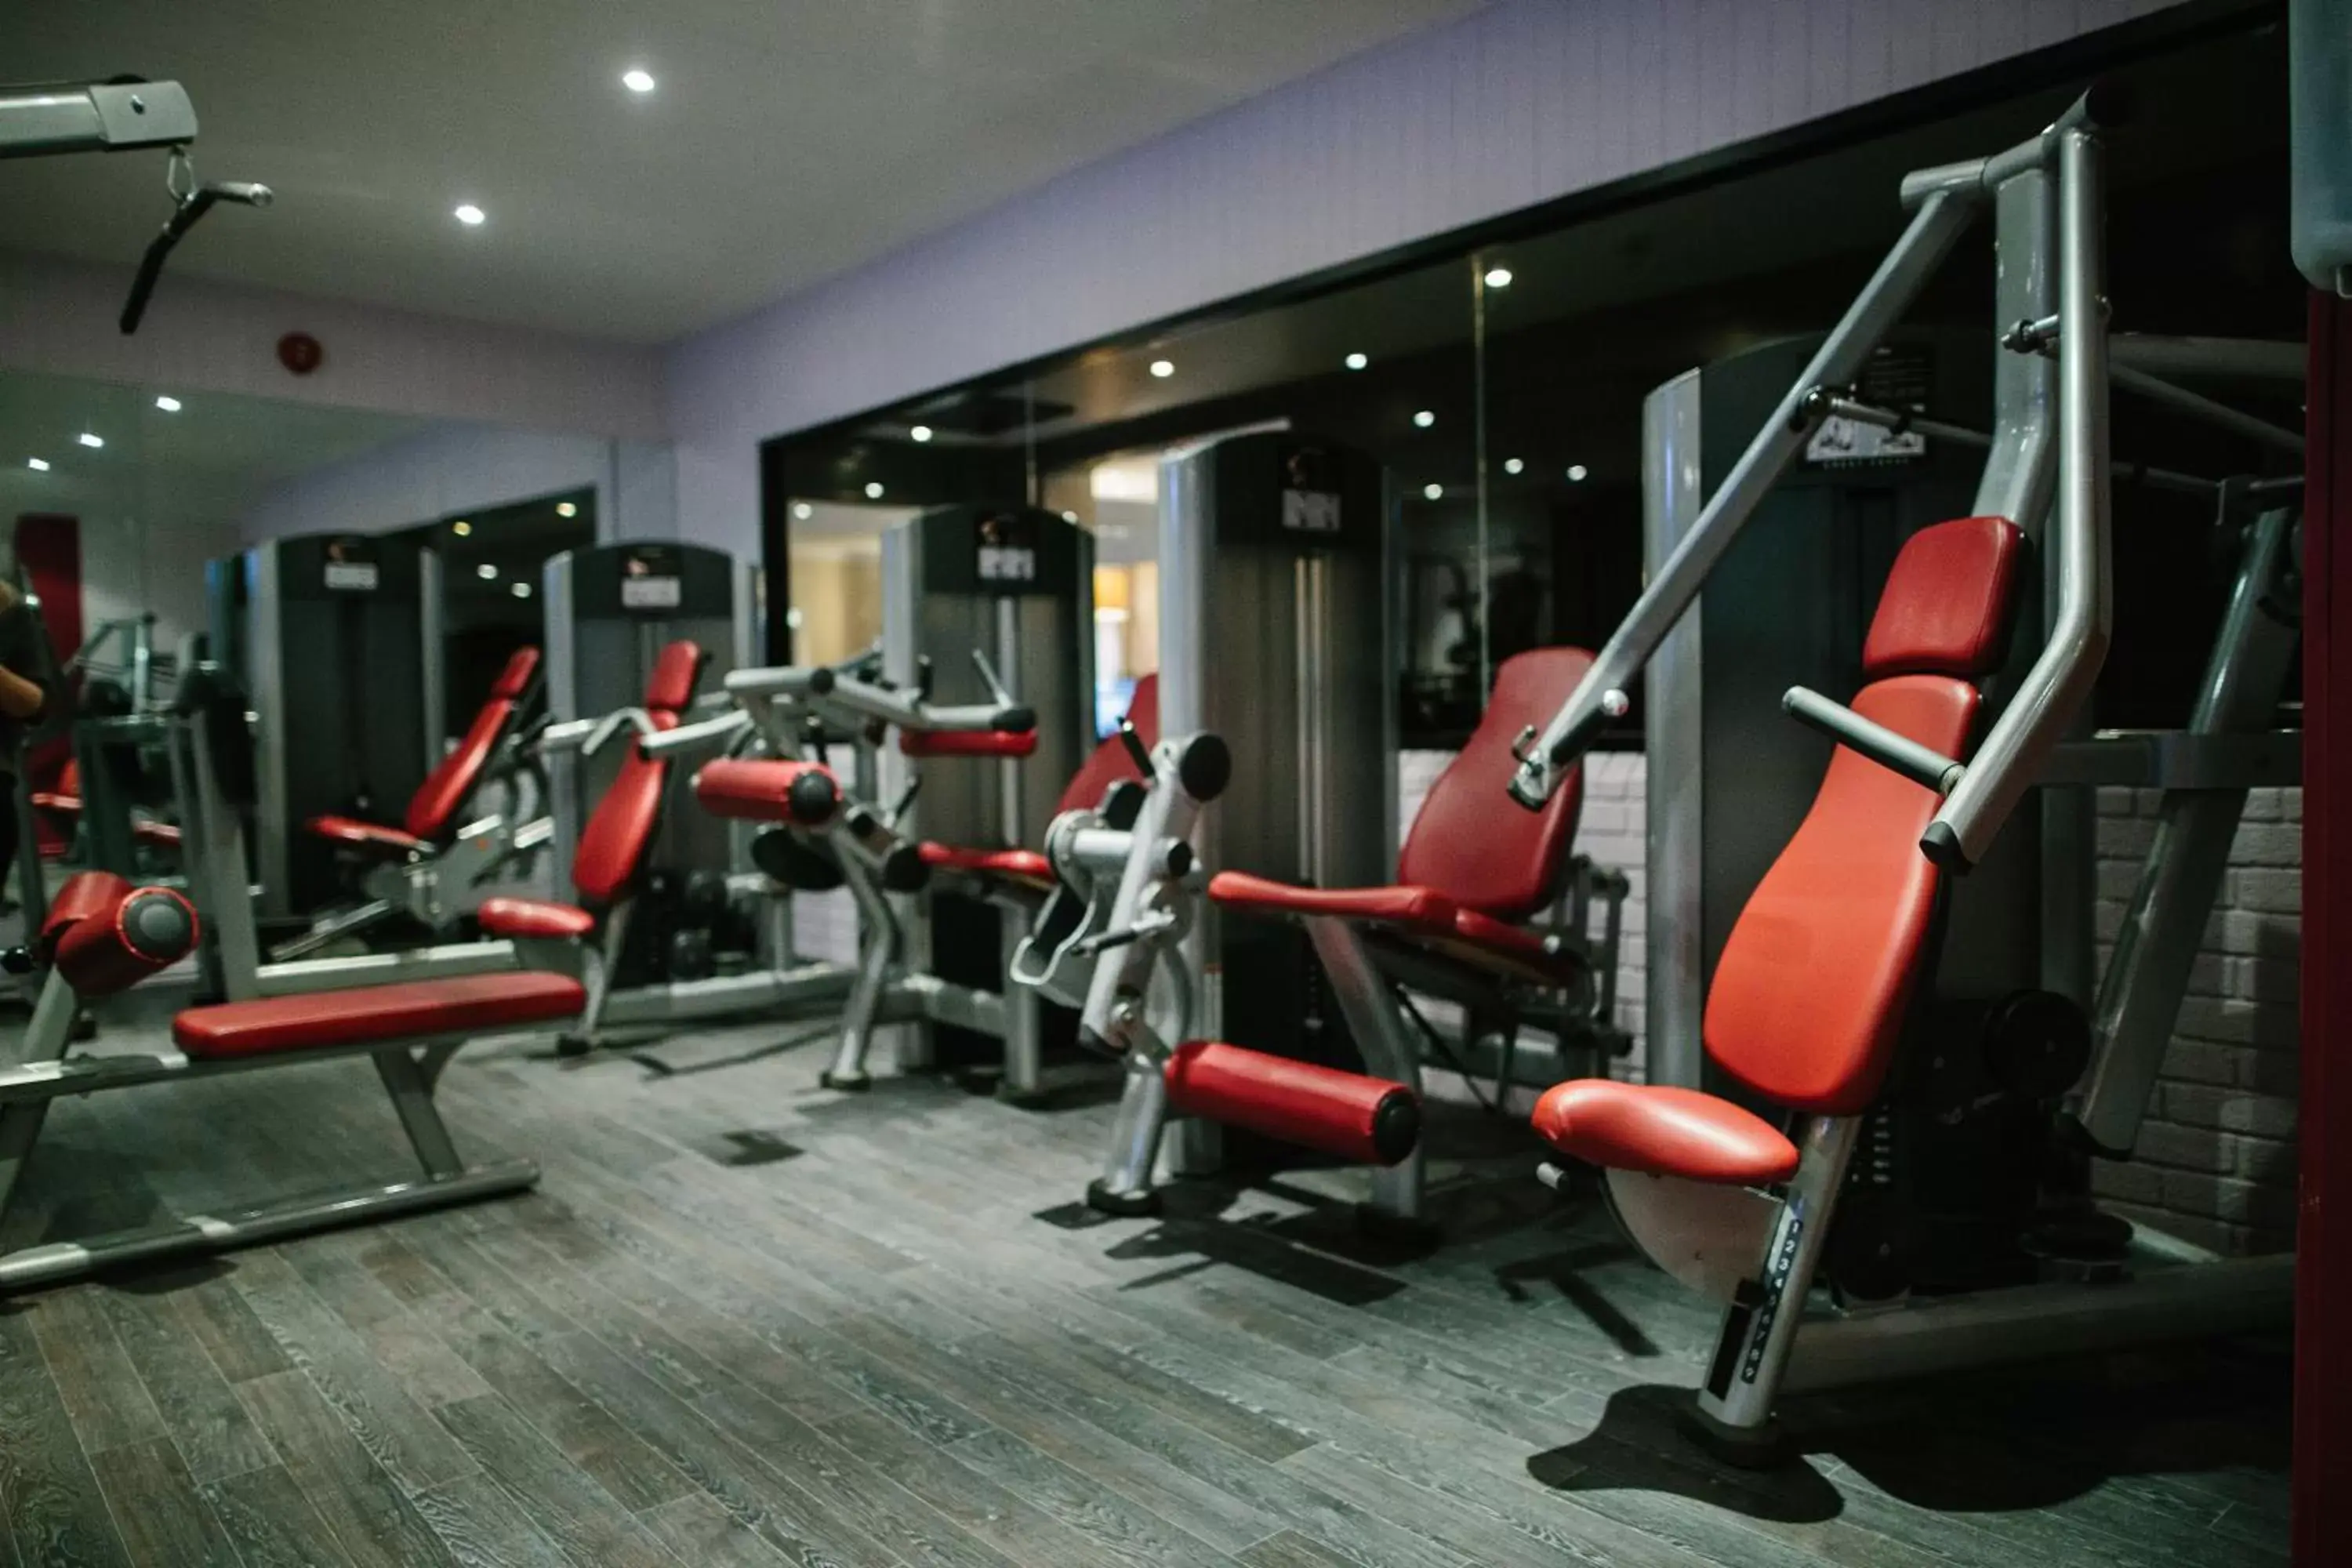 Fitness centre/facilities in Bryn Meadows Golf, Hotel & Spa